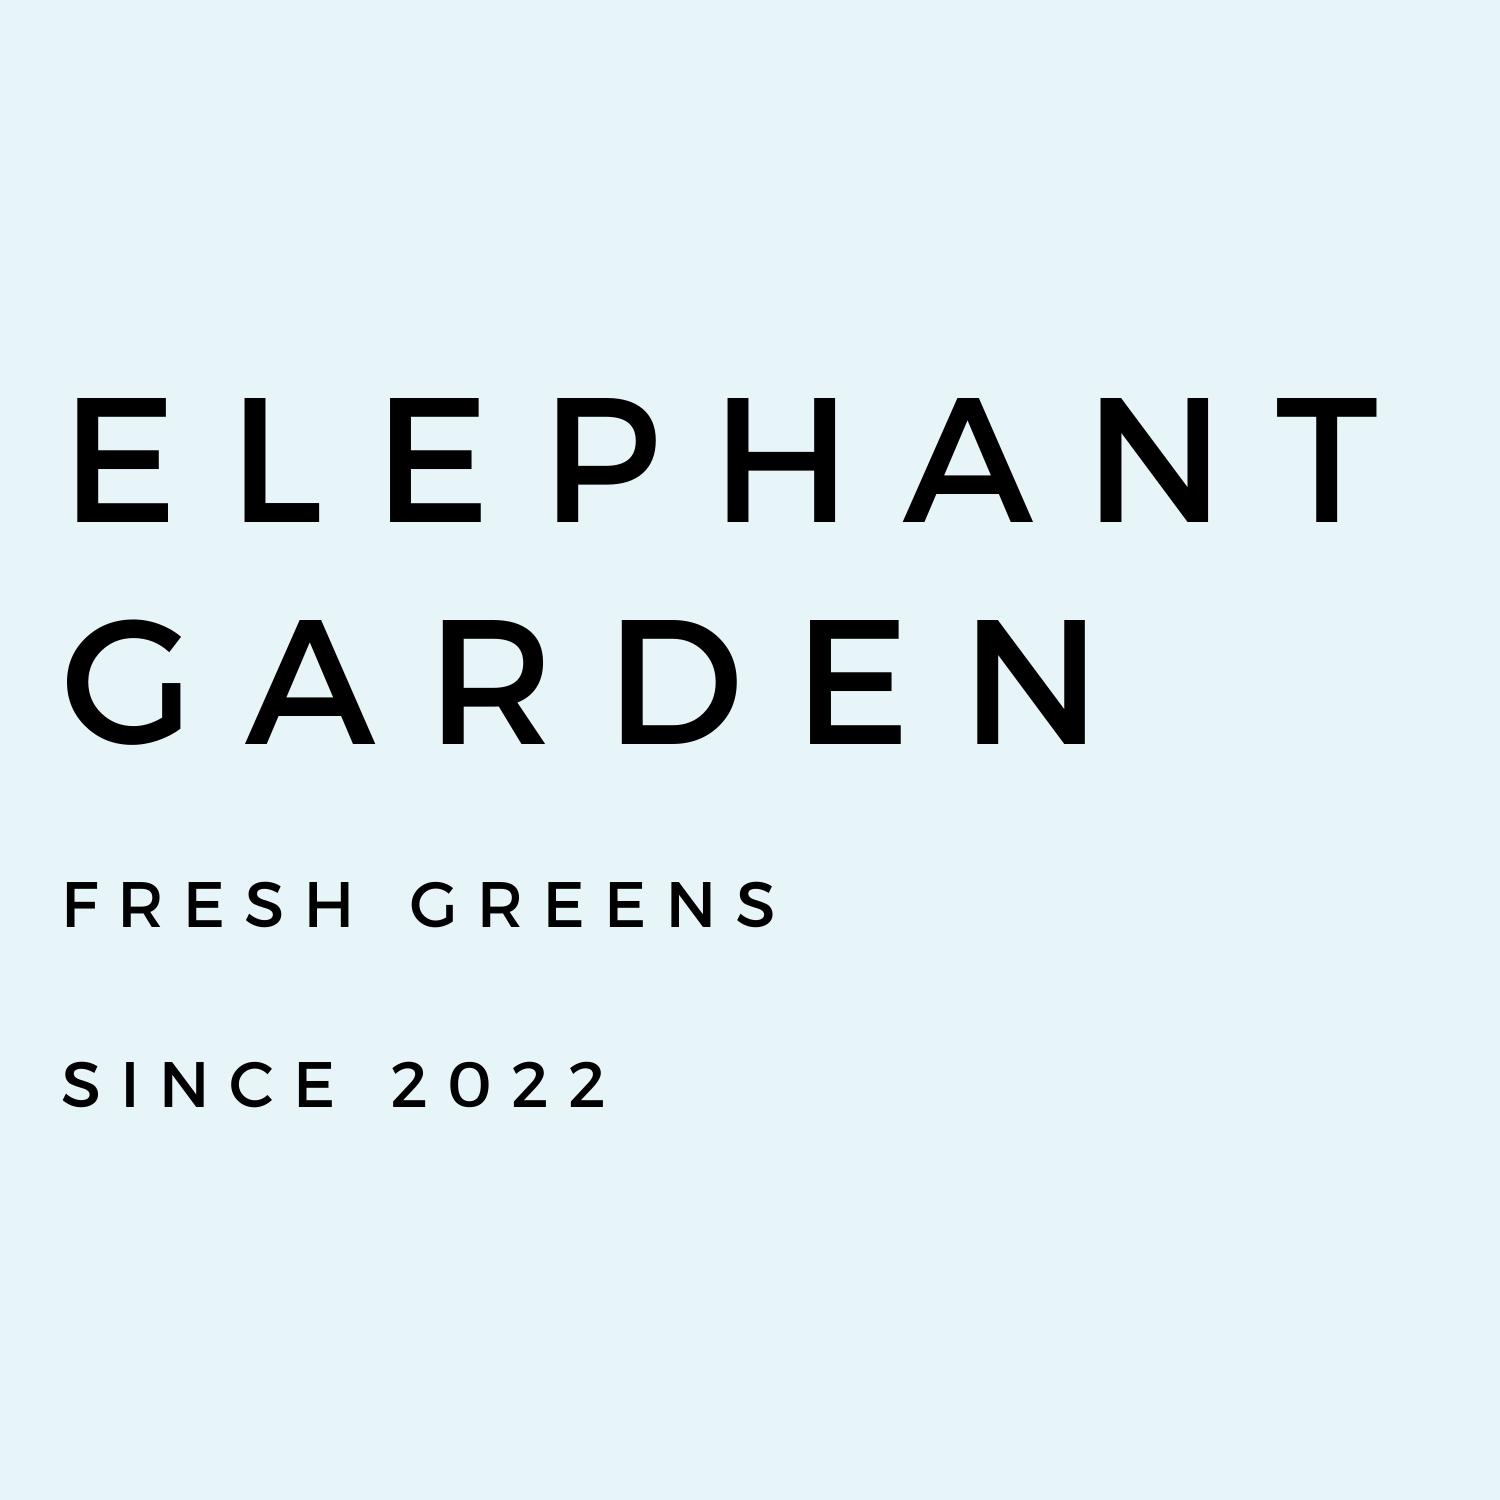 Buy Supreme Death at Elephant Garden Co Weed Dispensary Close 11 21 2023